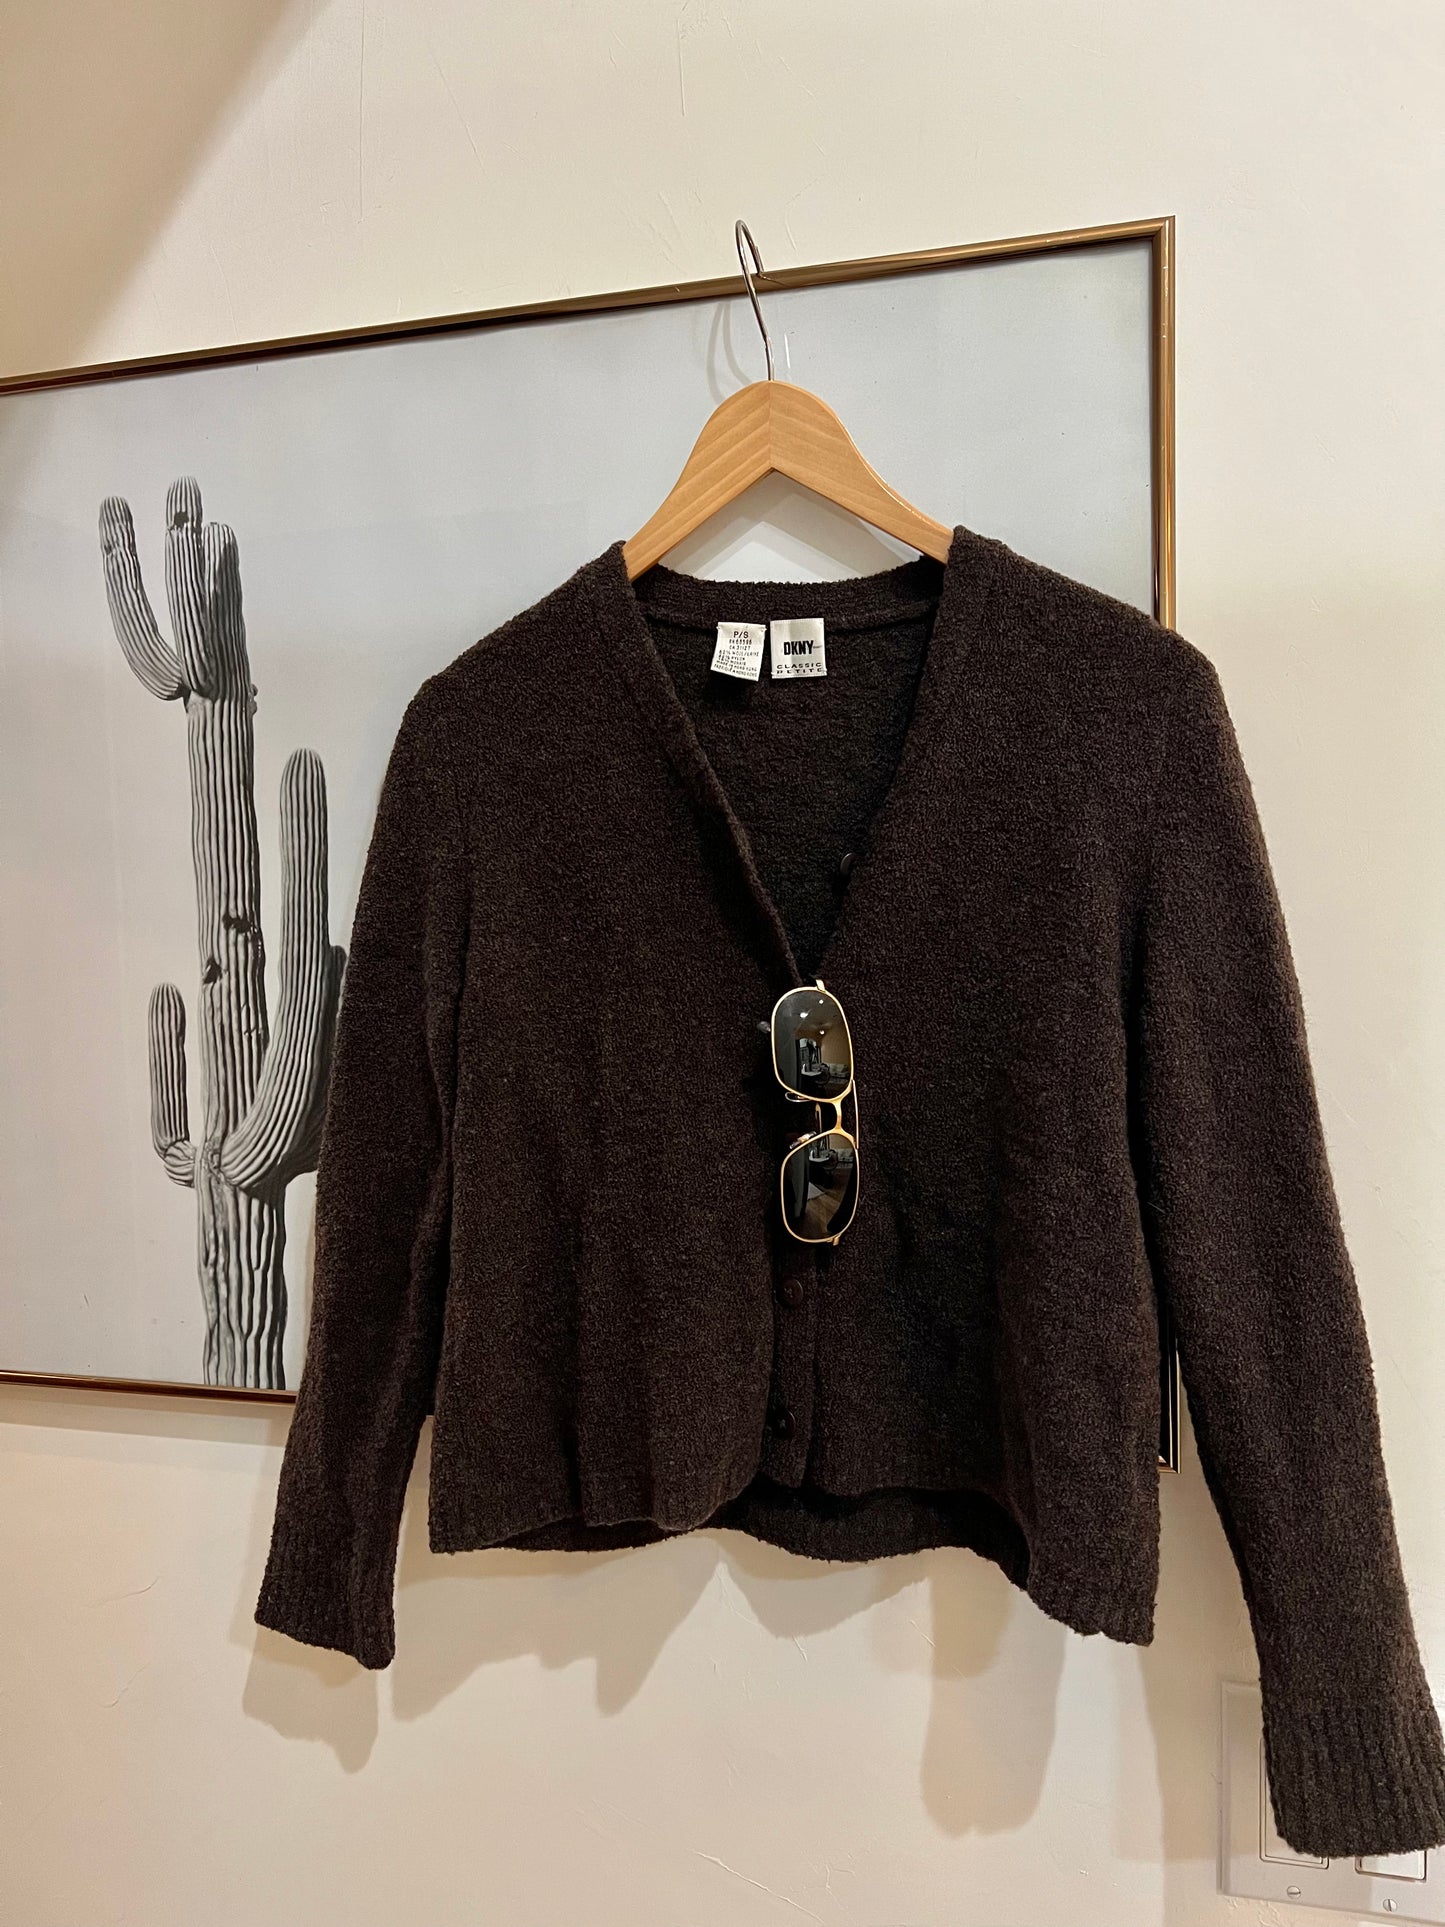 DNKY Brown Knit Cardi